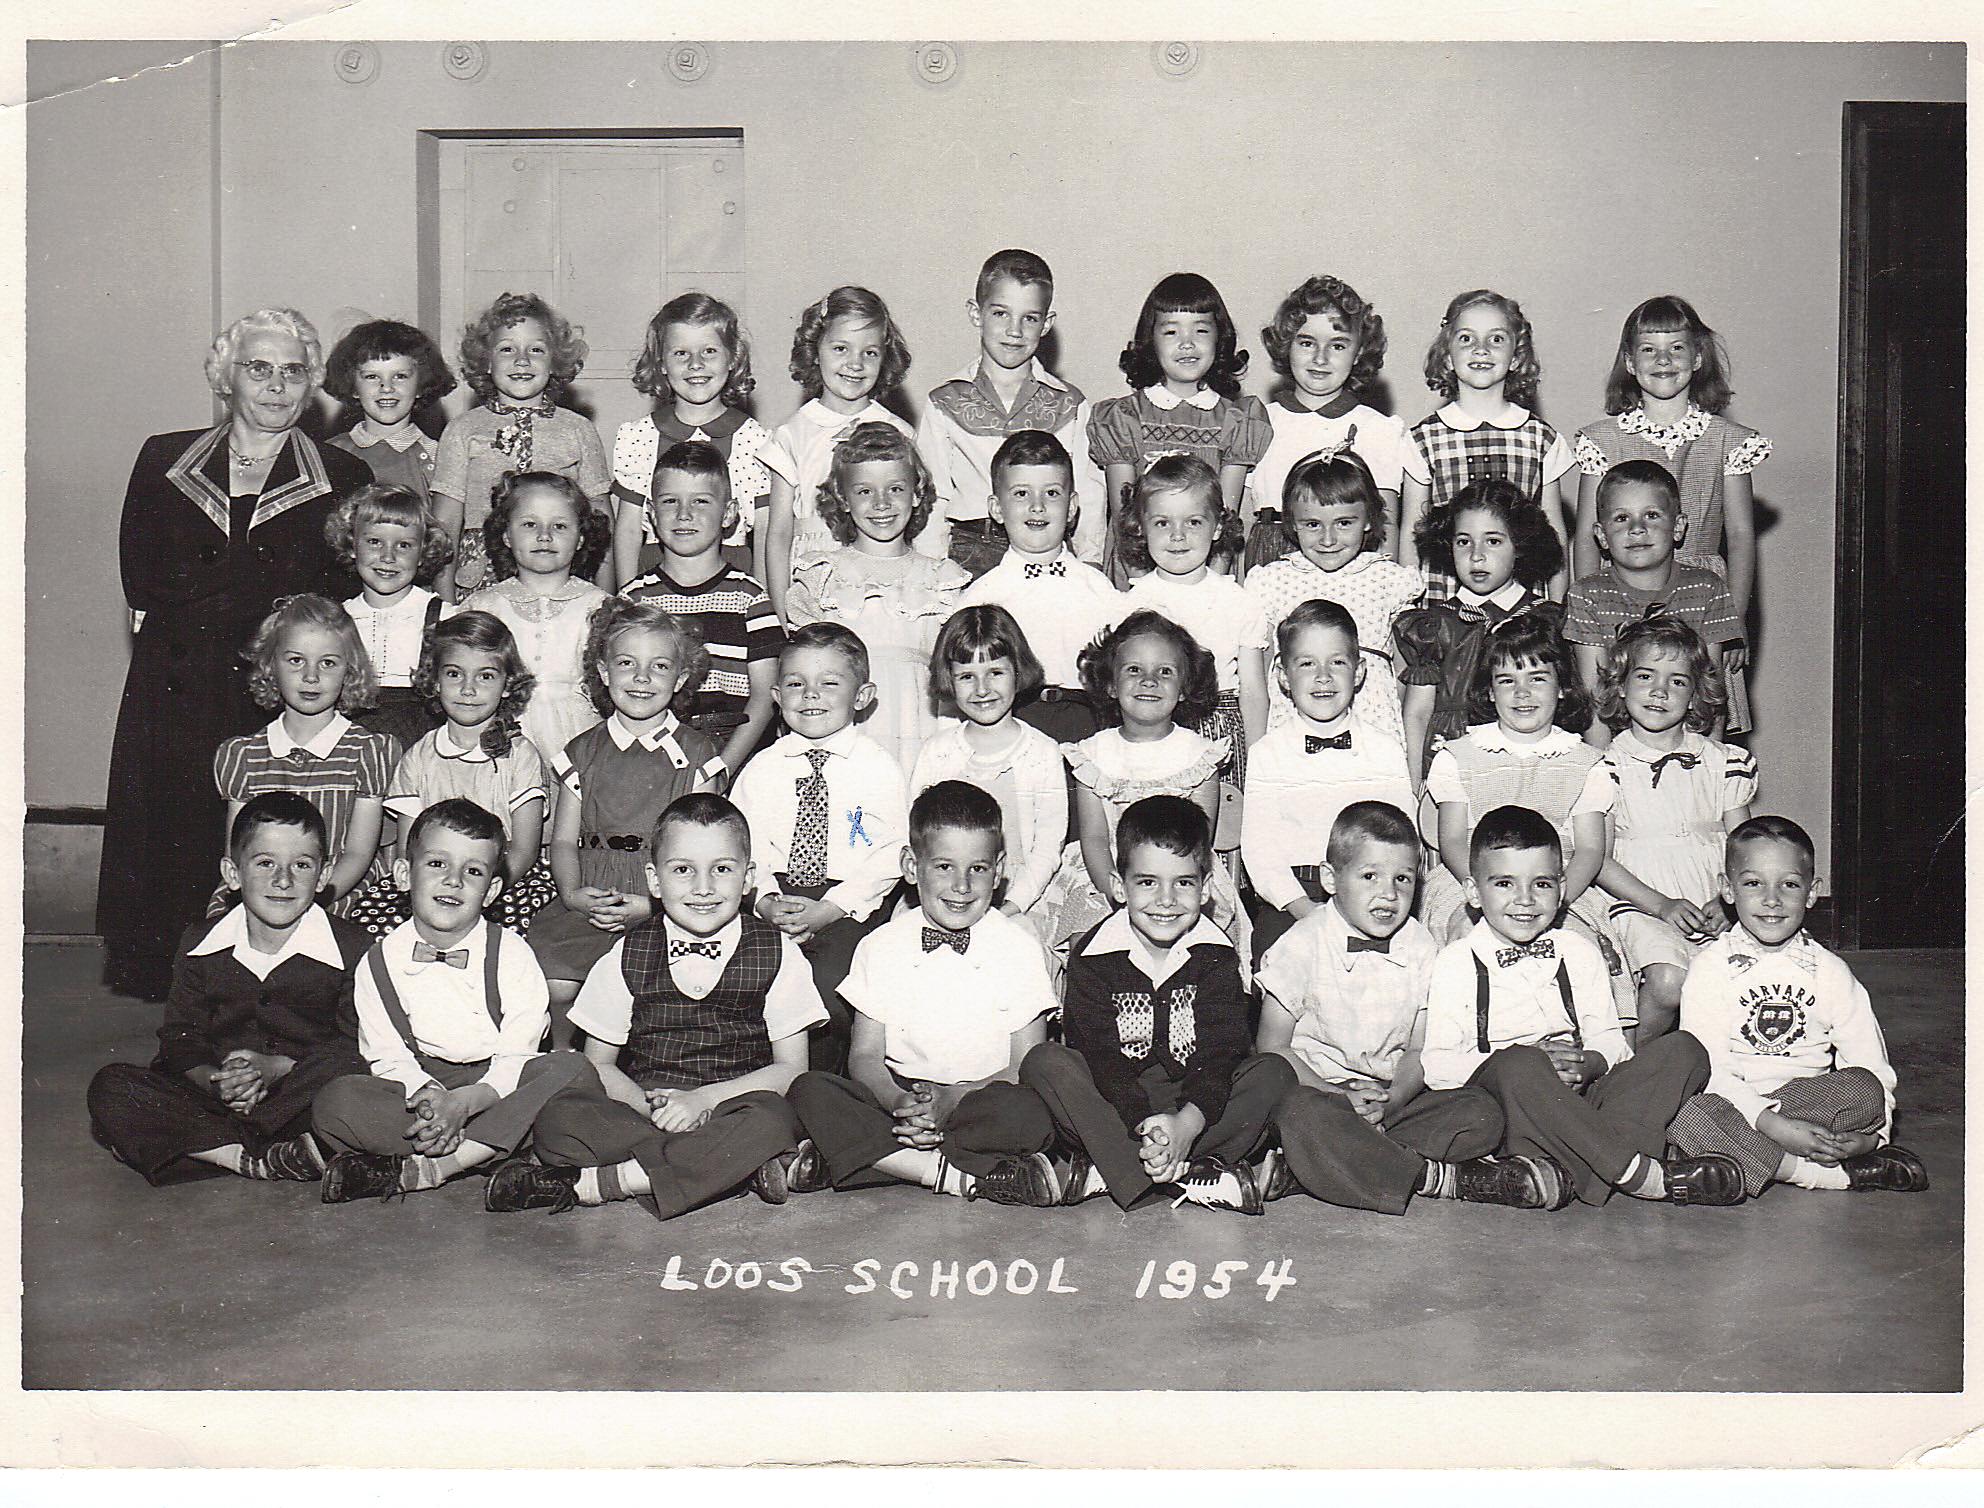 Kindergarten 1954, Loos Elementary School, submitted by Bill Bridges, FHS class of '66